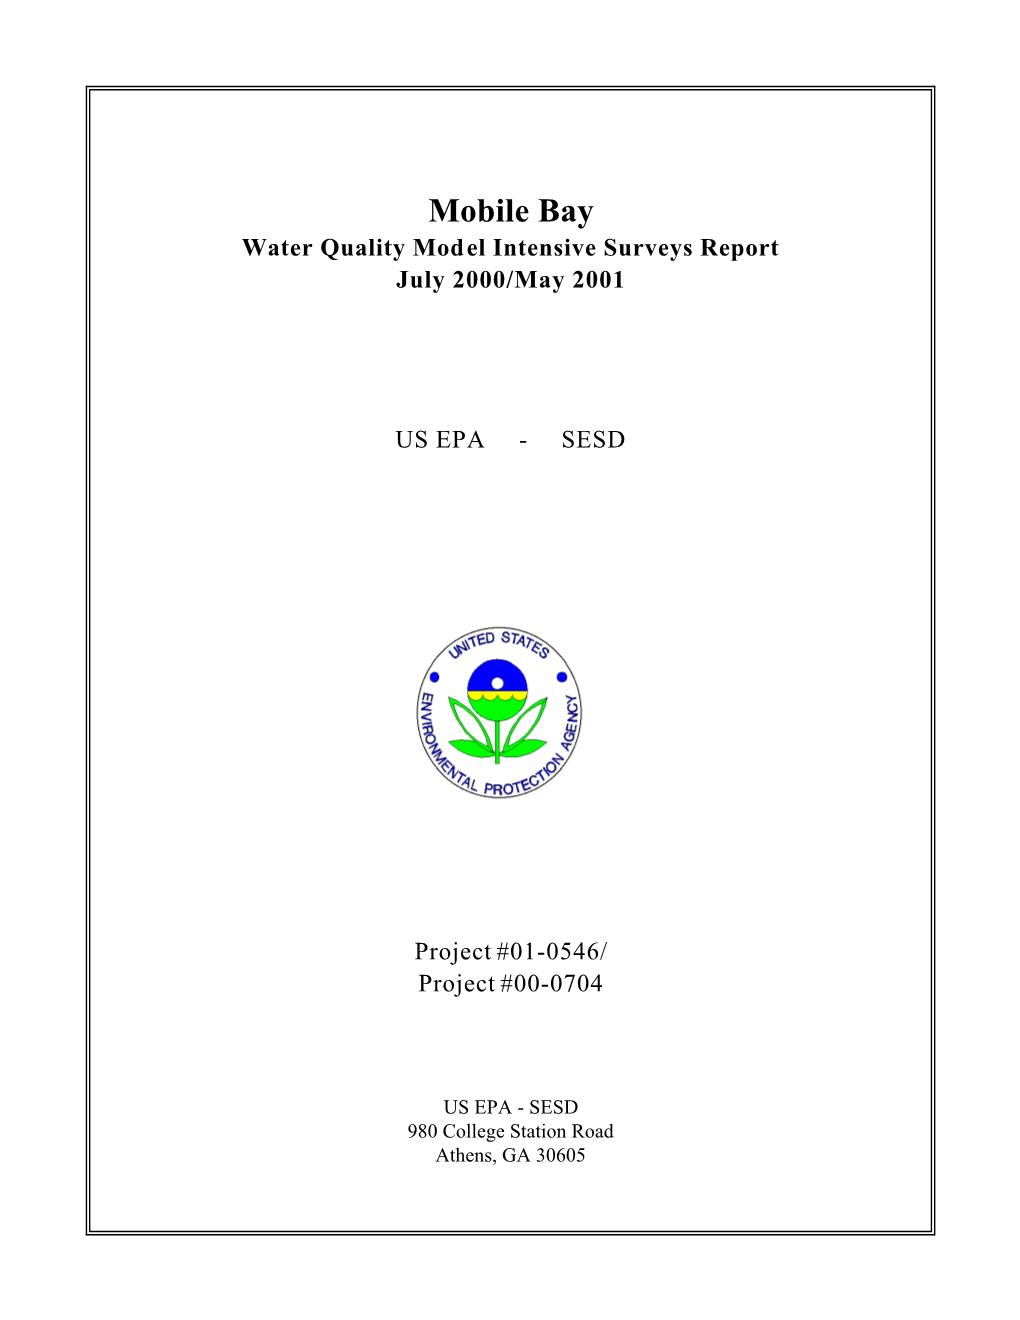 Mobile Bay: Water Quality Model Intensive Surveys Report